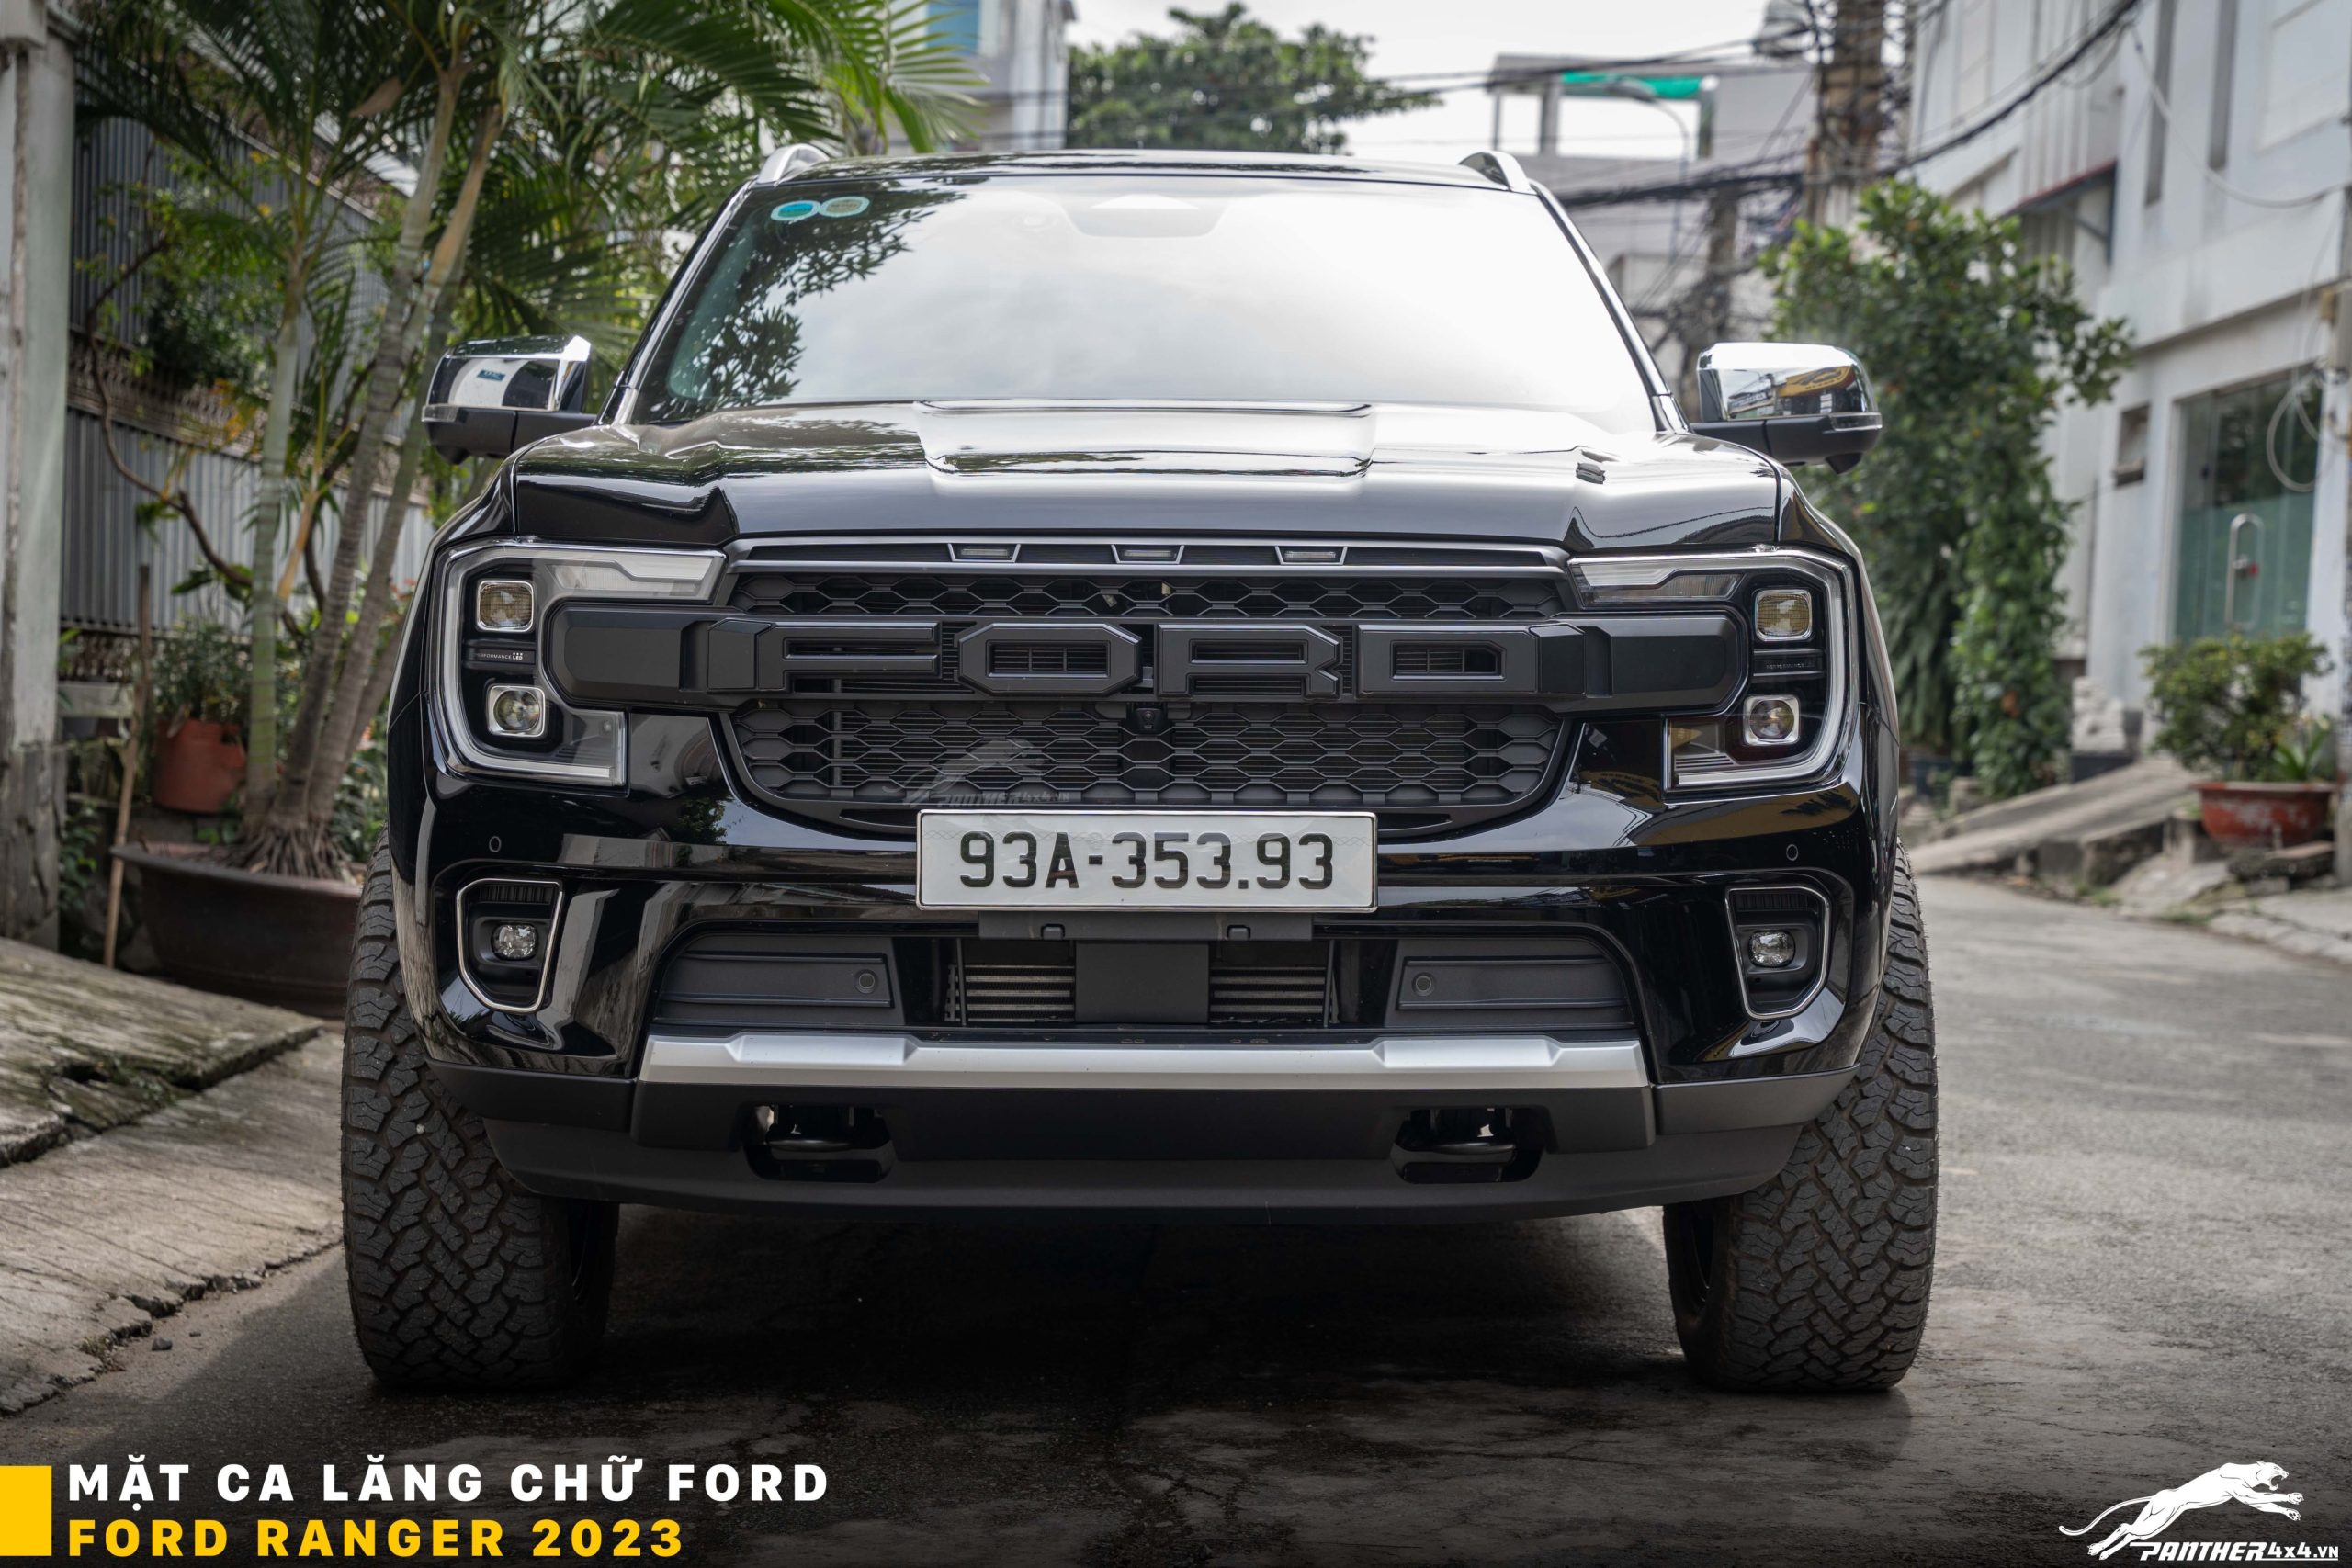 Mặt calang chữ FORD cho Ford Everest 2023